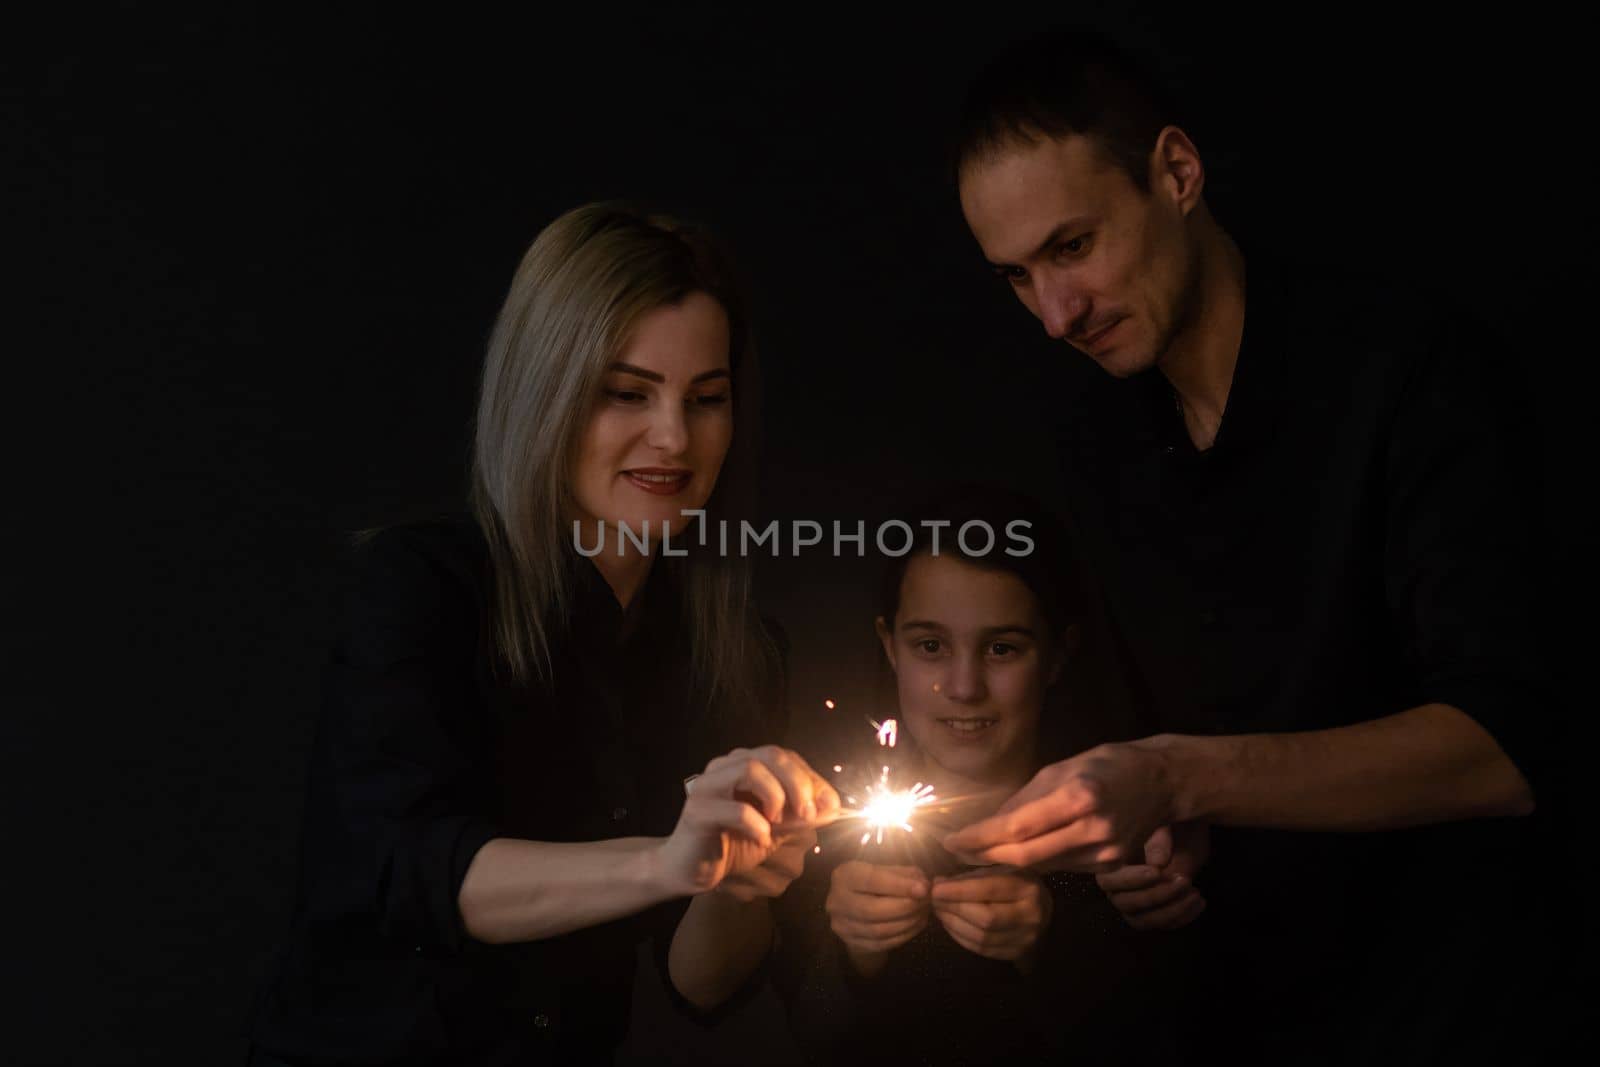 Young family with sparklers at Christmas time on a black background.